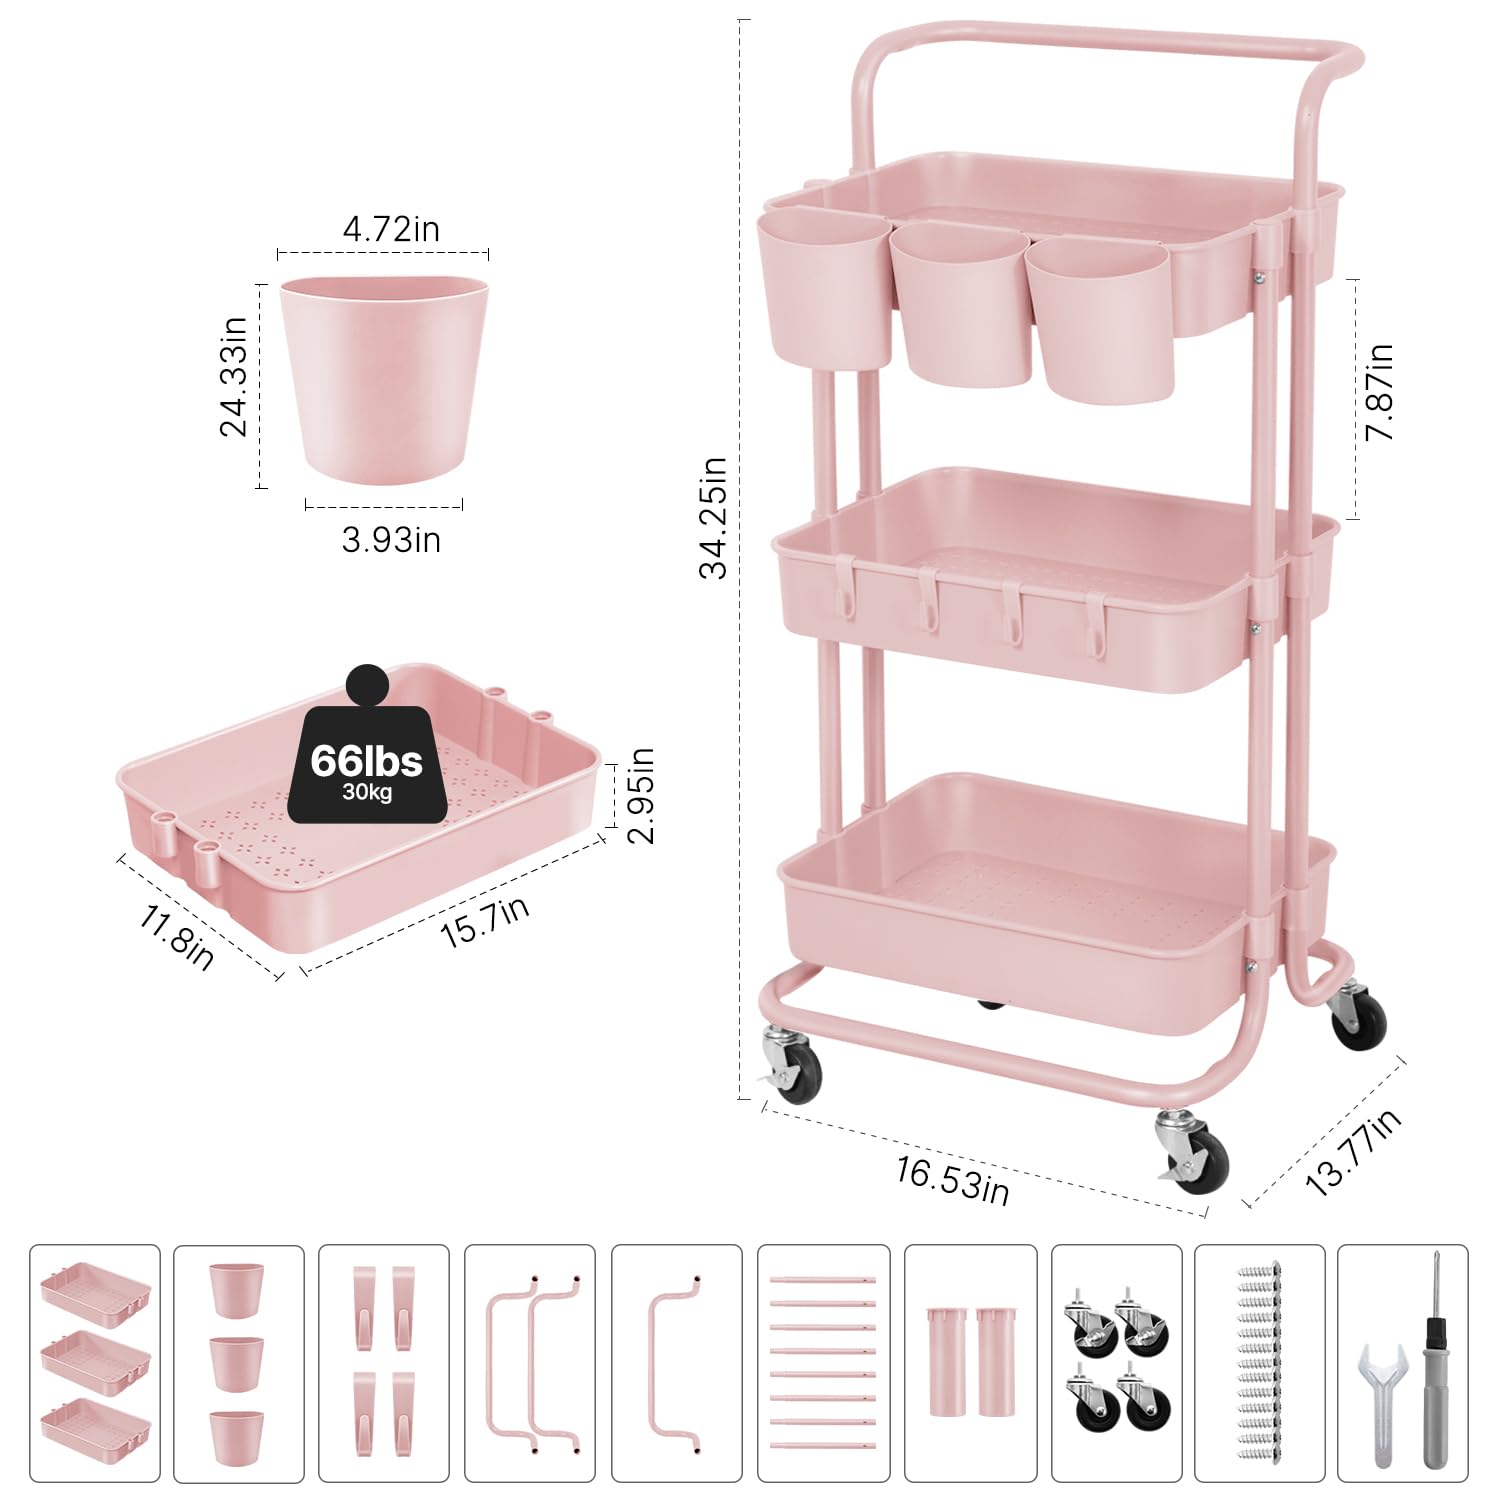 E&D FURNITURE 3 Tier Rolling Storage Cart with Wheels, Utility Art Craft Supply Cart Organizer on Wheels, Multipurpose Adjustable Makeup Cart Hair Salon Trolley with Handle & Hanging Cups Pink